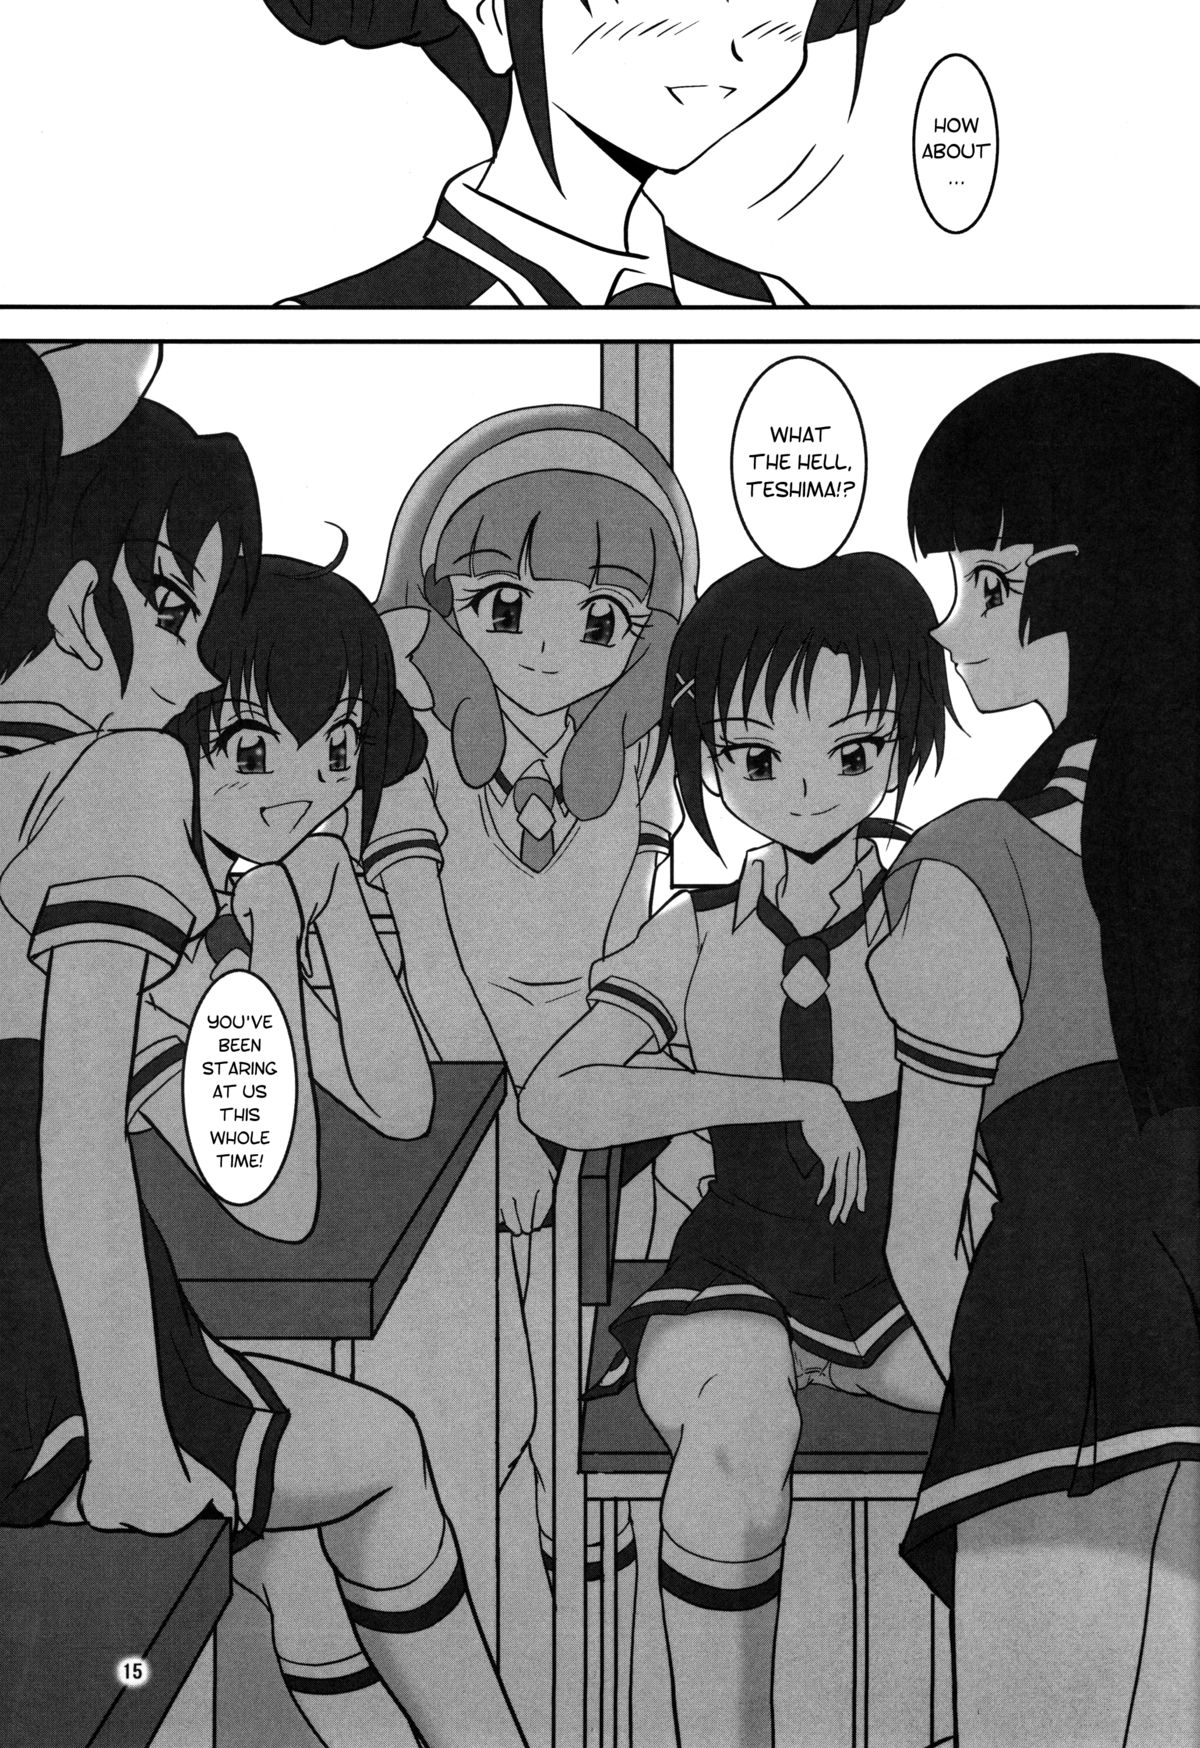 (C82) [AFJ (Ashi_O)] Smell Zuricure | Smell Footycure (Smile Precure!) [English] page 16 full